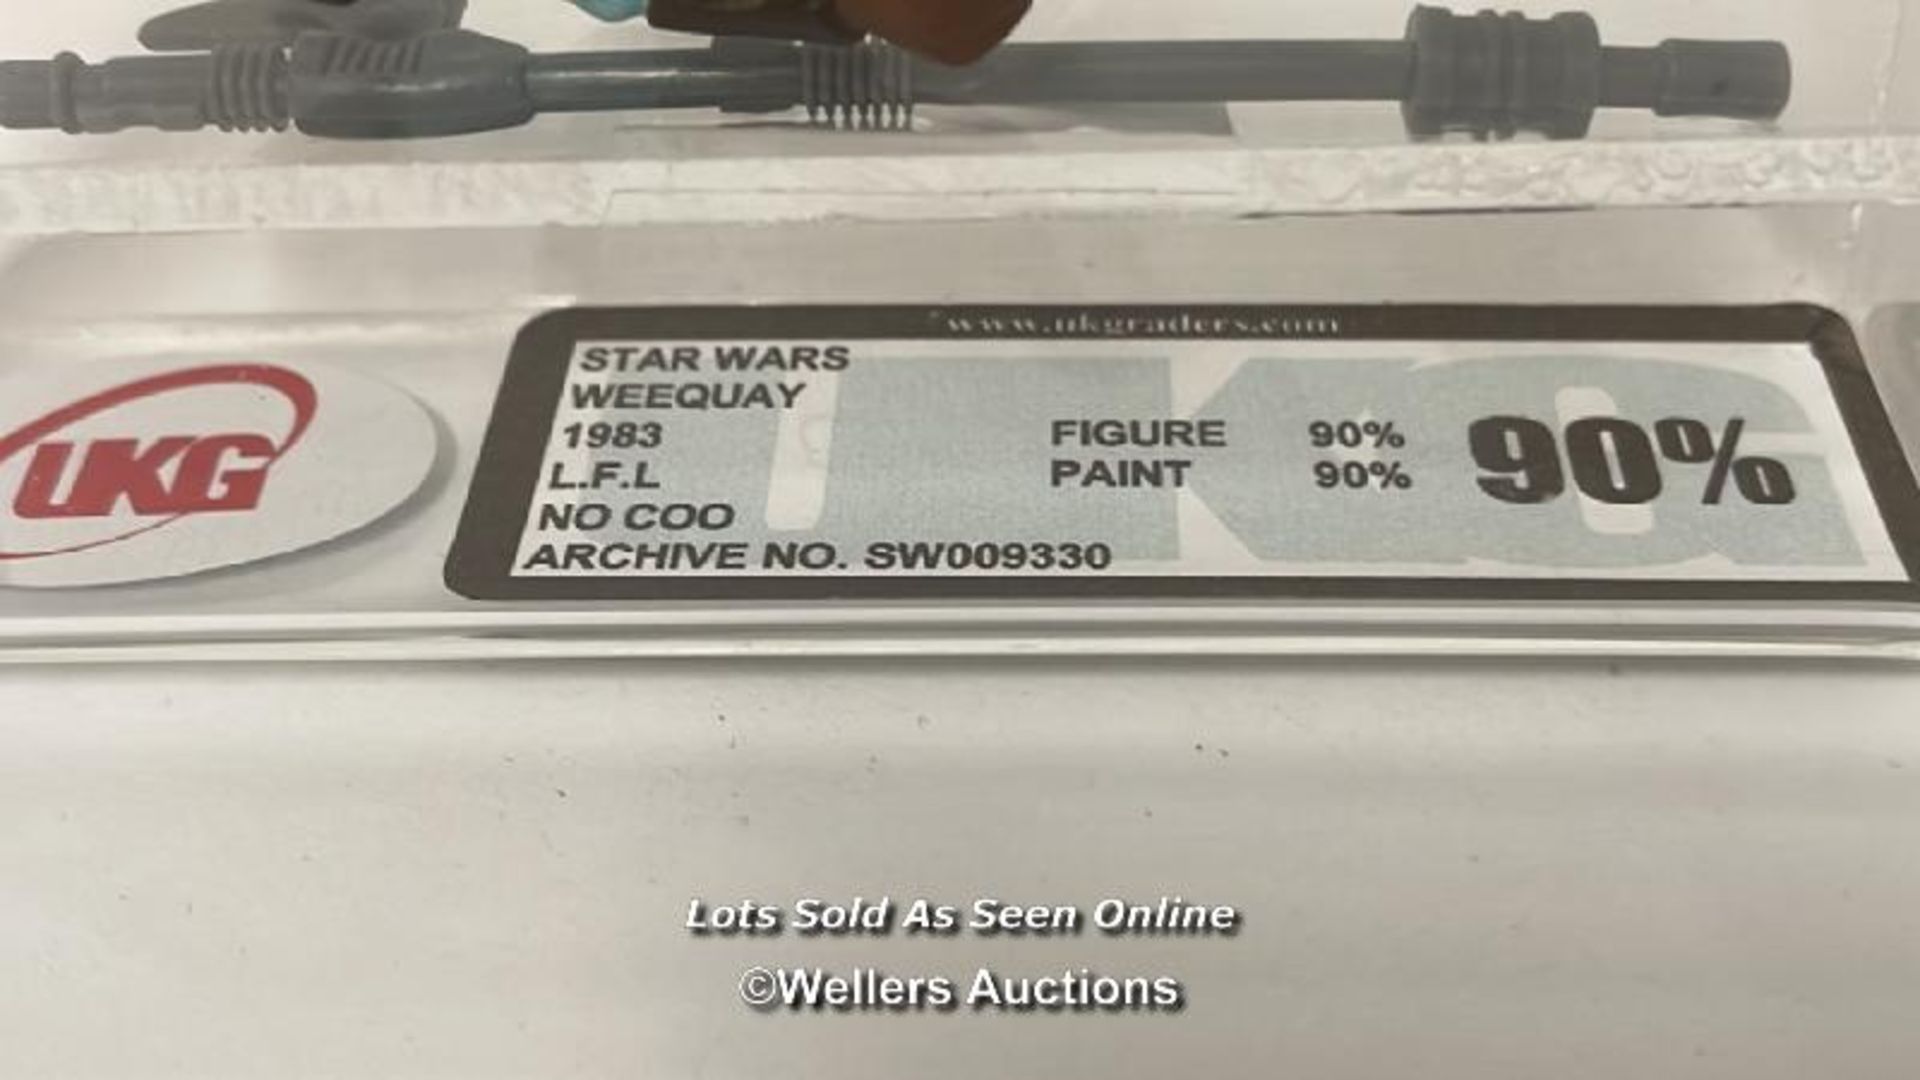 Star Wars vintage Weequay 3 3/4" figure, NO COO, 1983, UKG graded 90% figure 90 paint 90 - Image 3 of 7